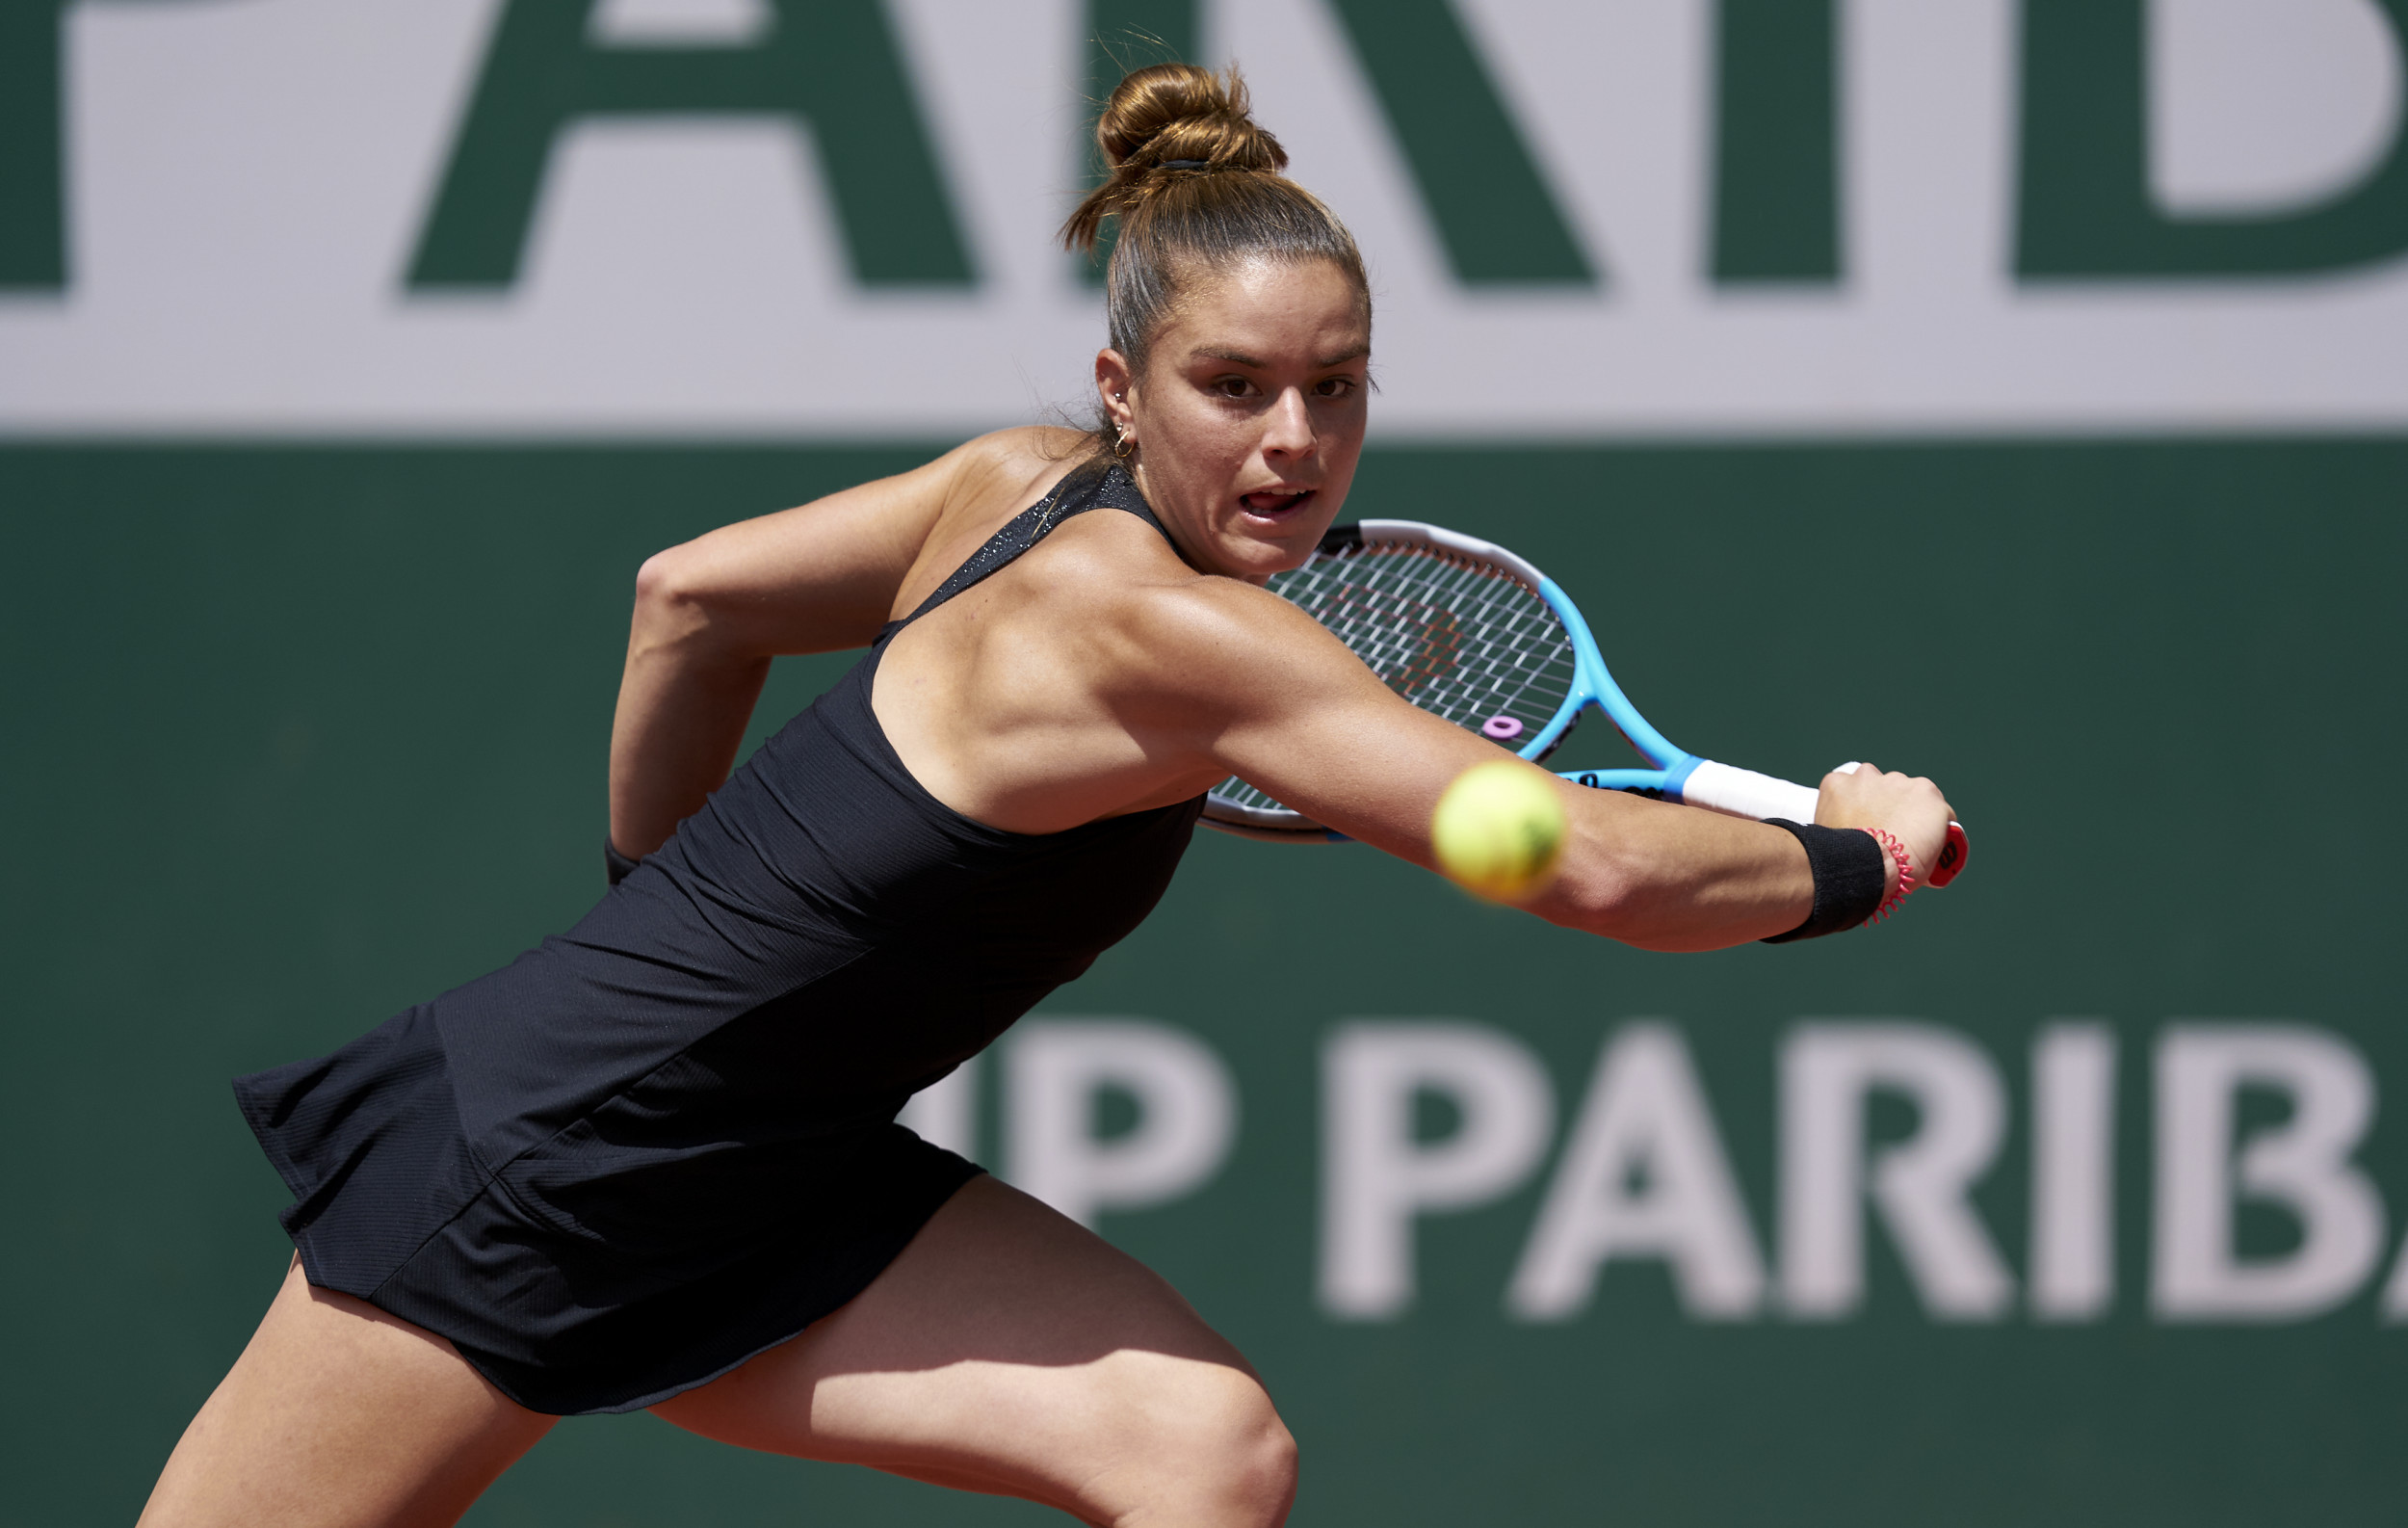 French Open 2021 preview: All you need to know